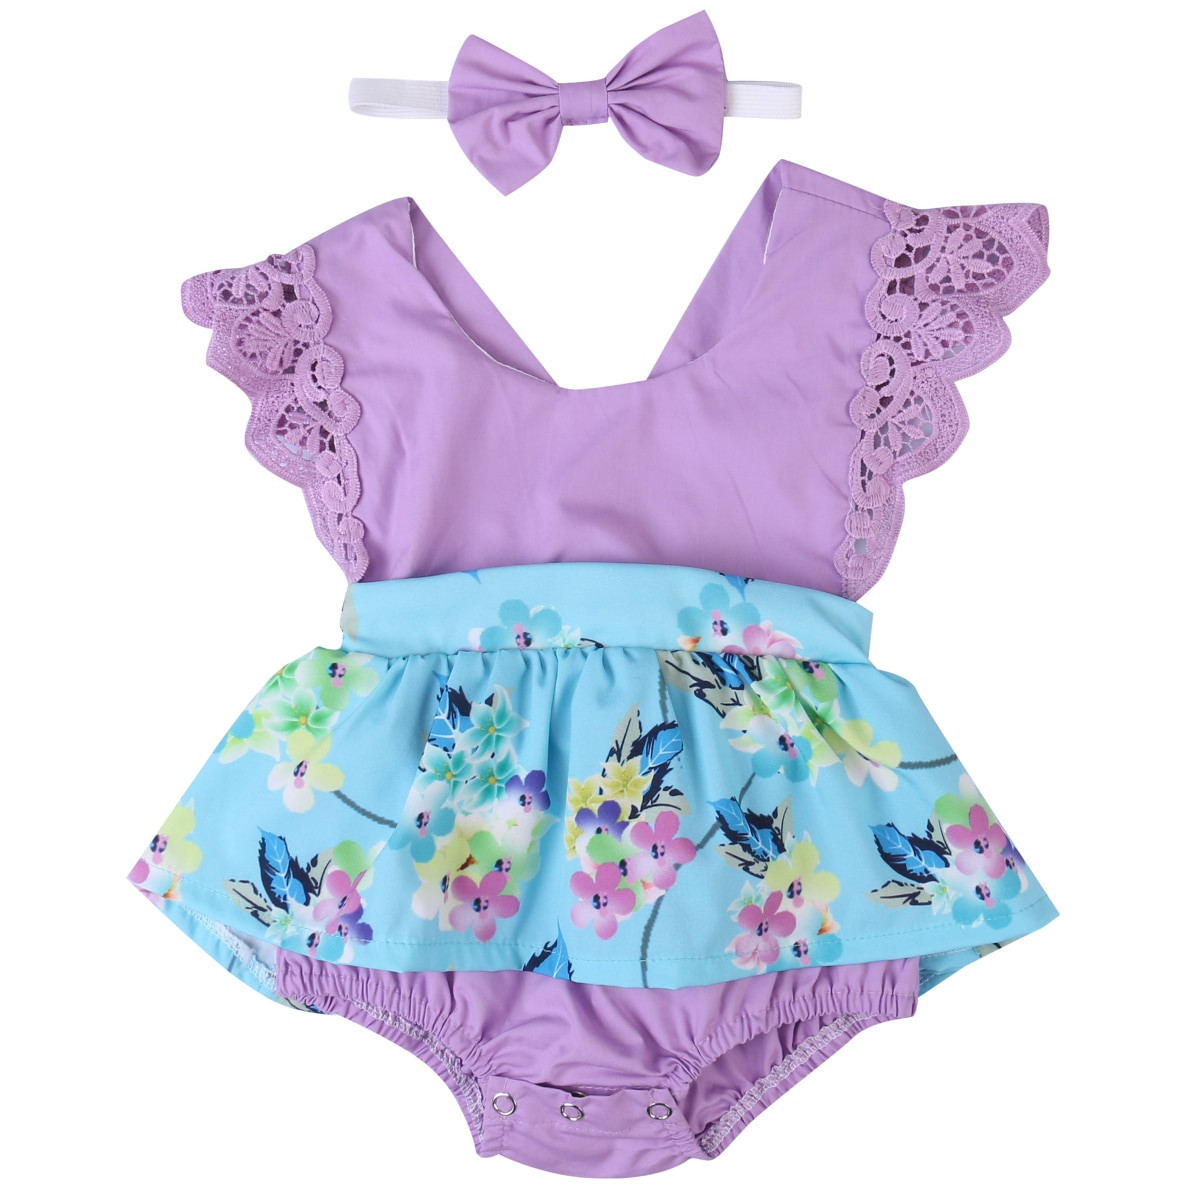 Fashion Clothing For Baby Girls
 Baby Girl Flower Tops Headband Bow 2pcs Outfits Newborn